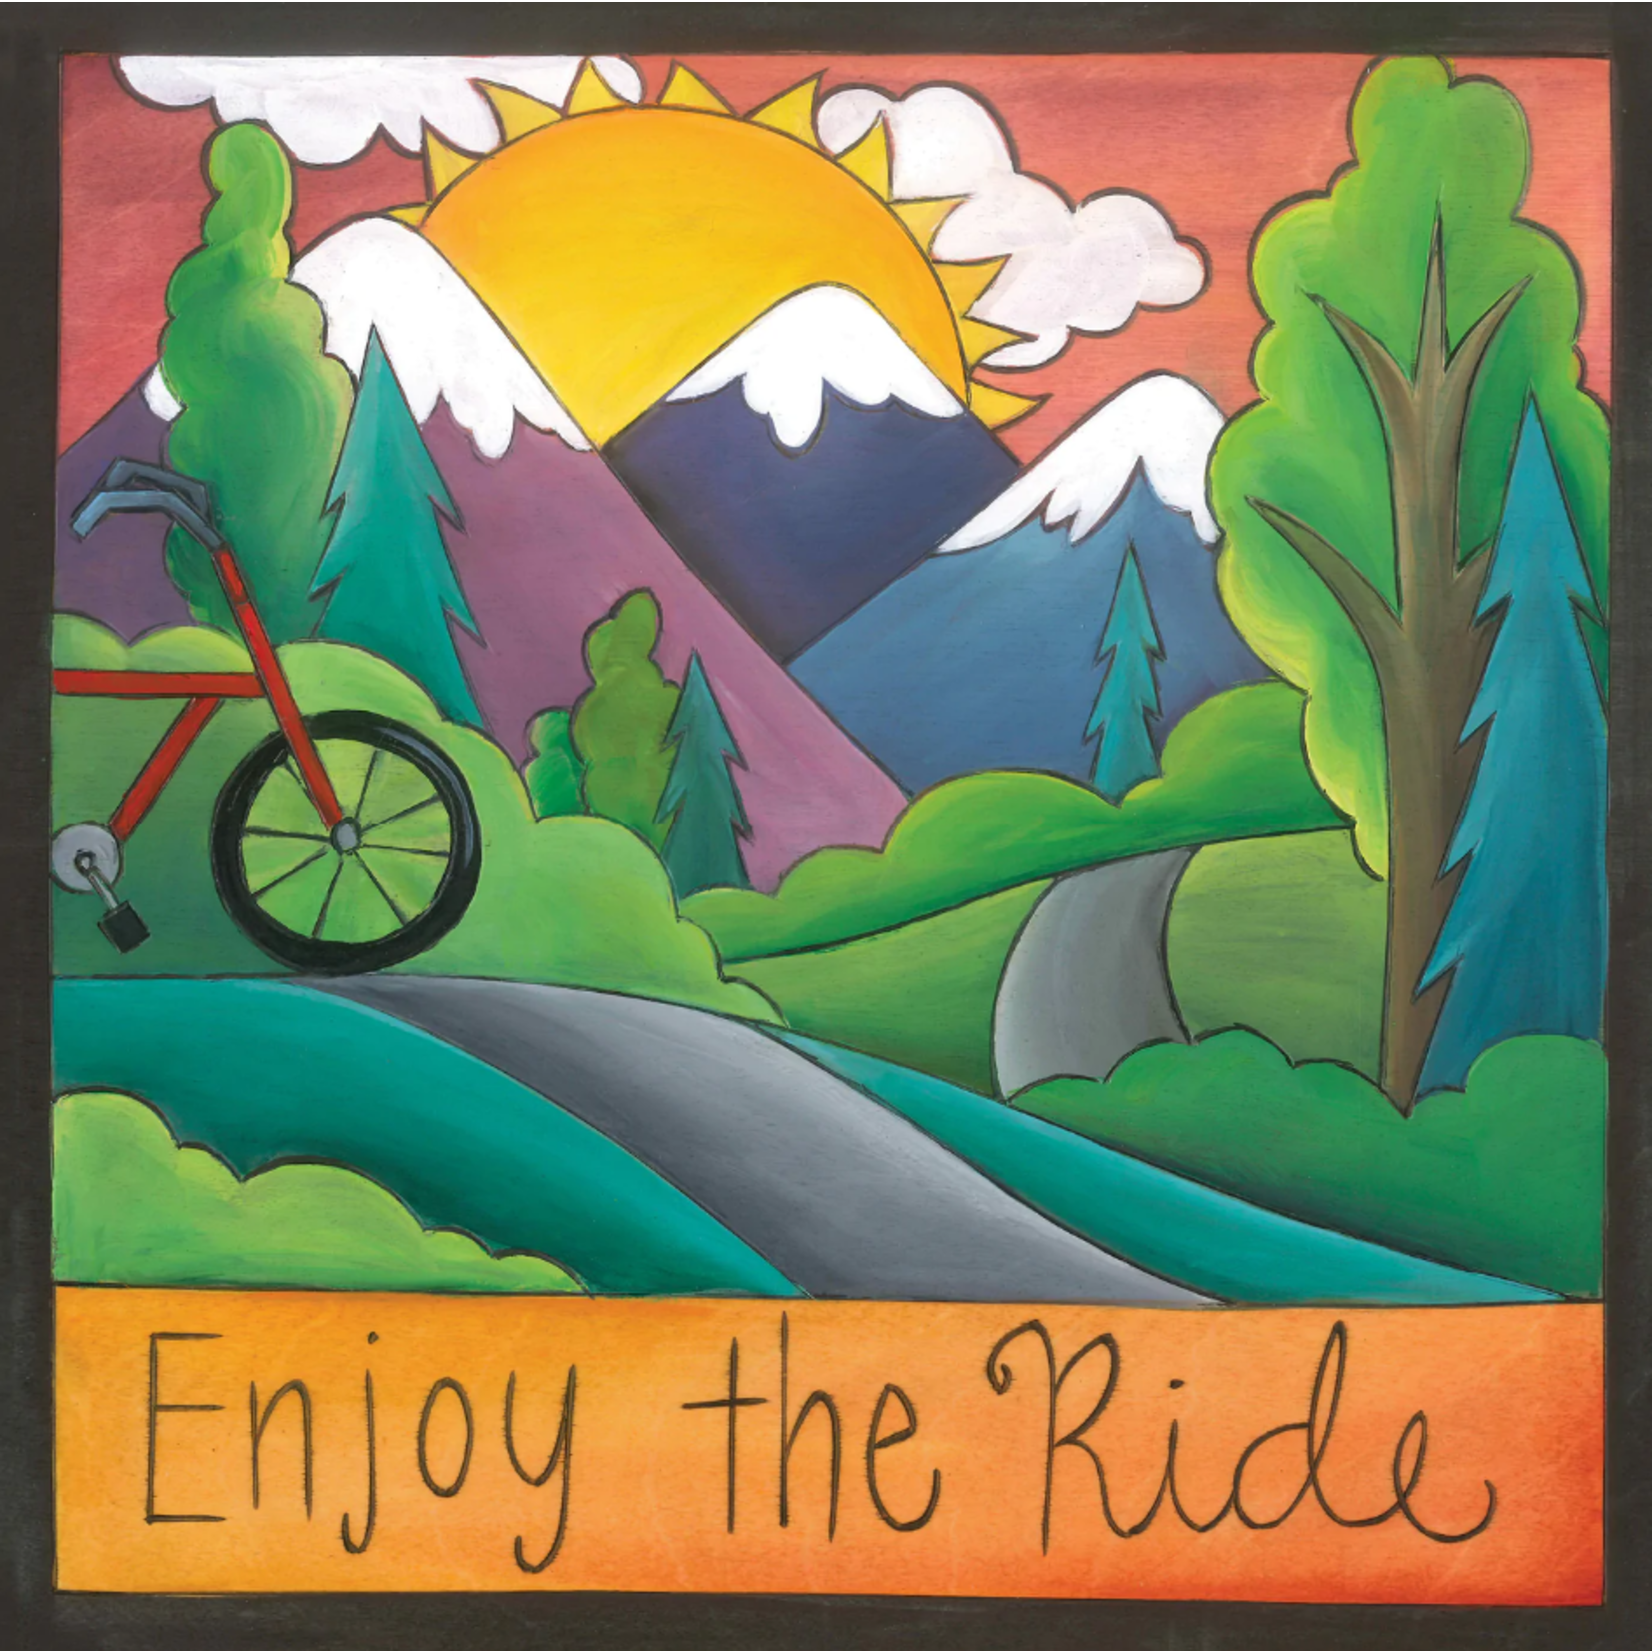 SINCERELY, STICKS OPEN ROAD - WOOD WALL ART  "ENJOY THE RIDE"